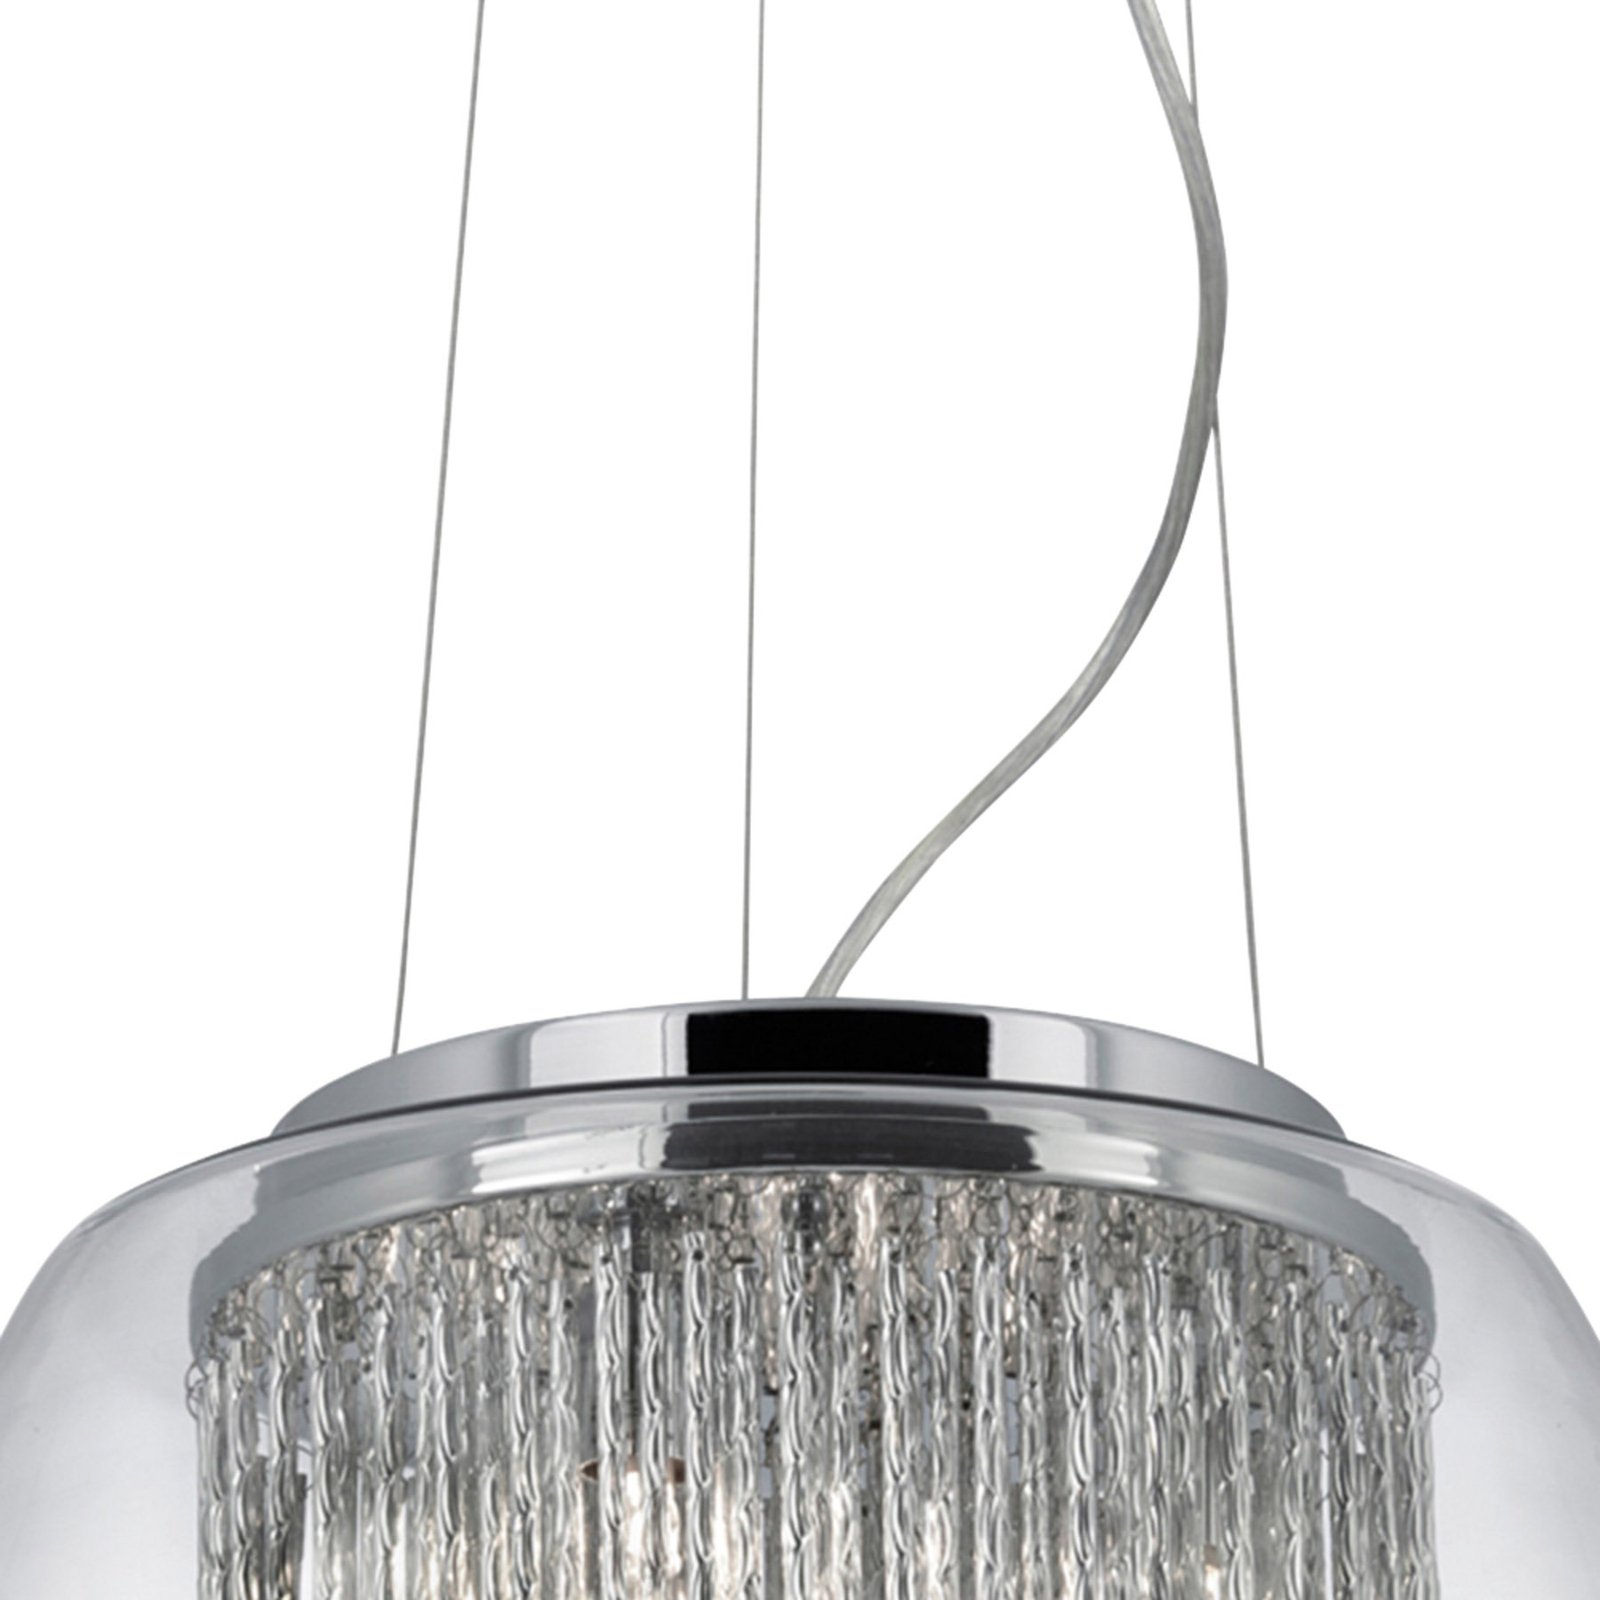 Curva glass hanging light with a glamorous design